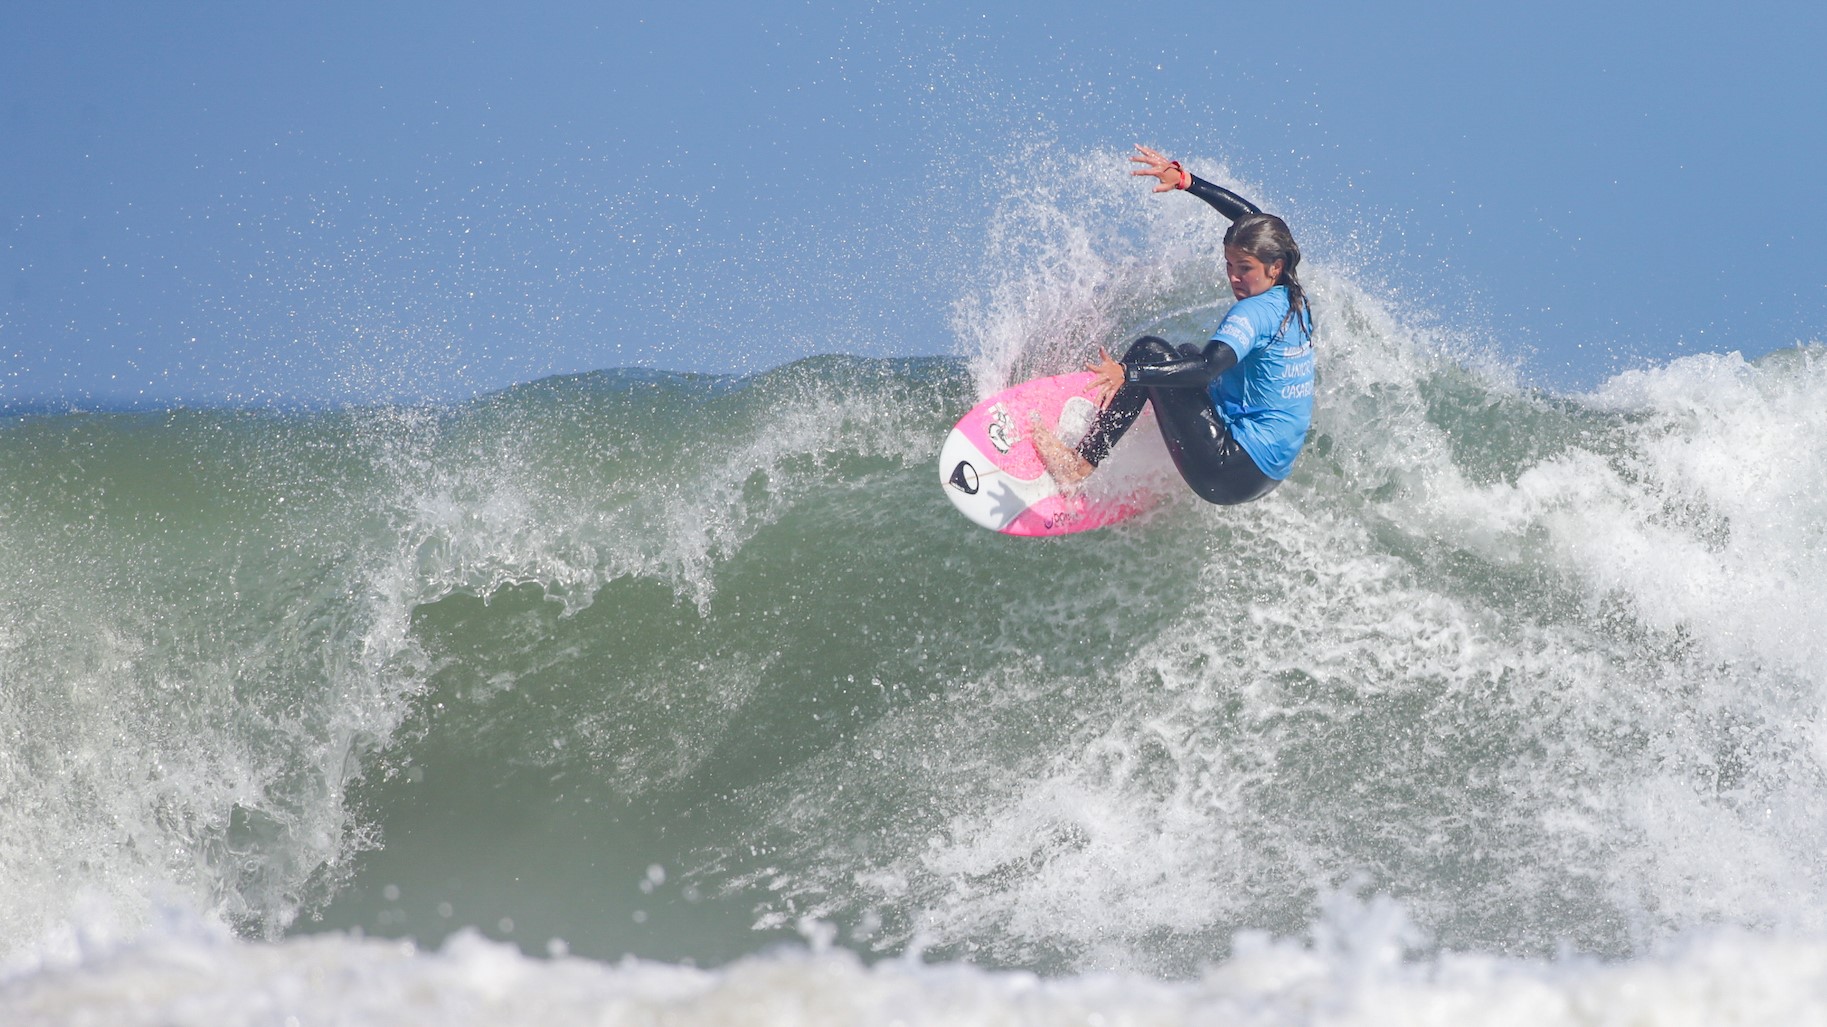 French surfers compete on the European junior circuit